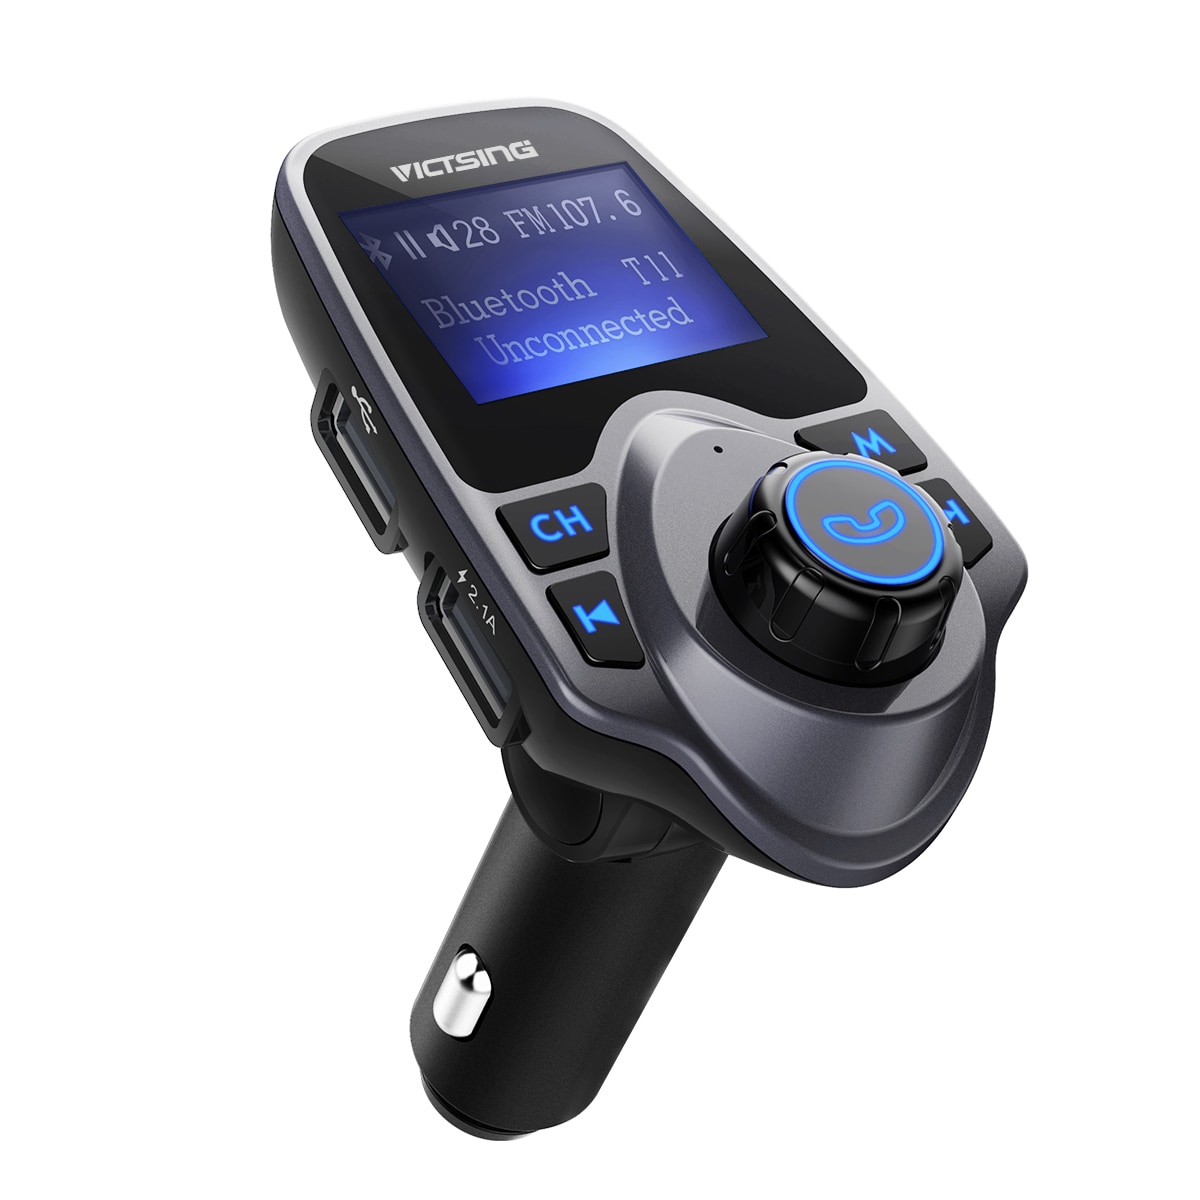 Bluetooth FM Transmitter and MP3 Player TF Card Slot In-Car FM Adapter Car Kit with USB Car Charging for Smartphone Black AGPtek Wireless Car Kit with 3.5mm Audio Port